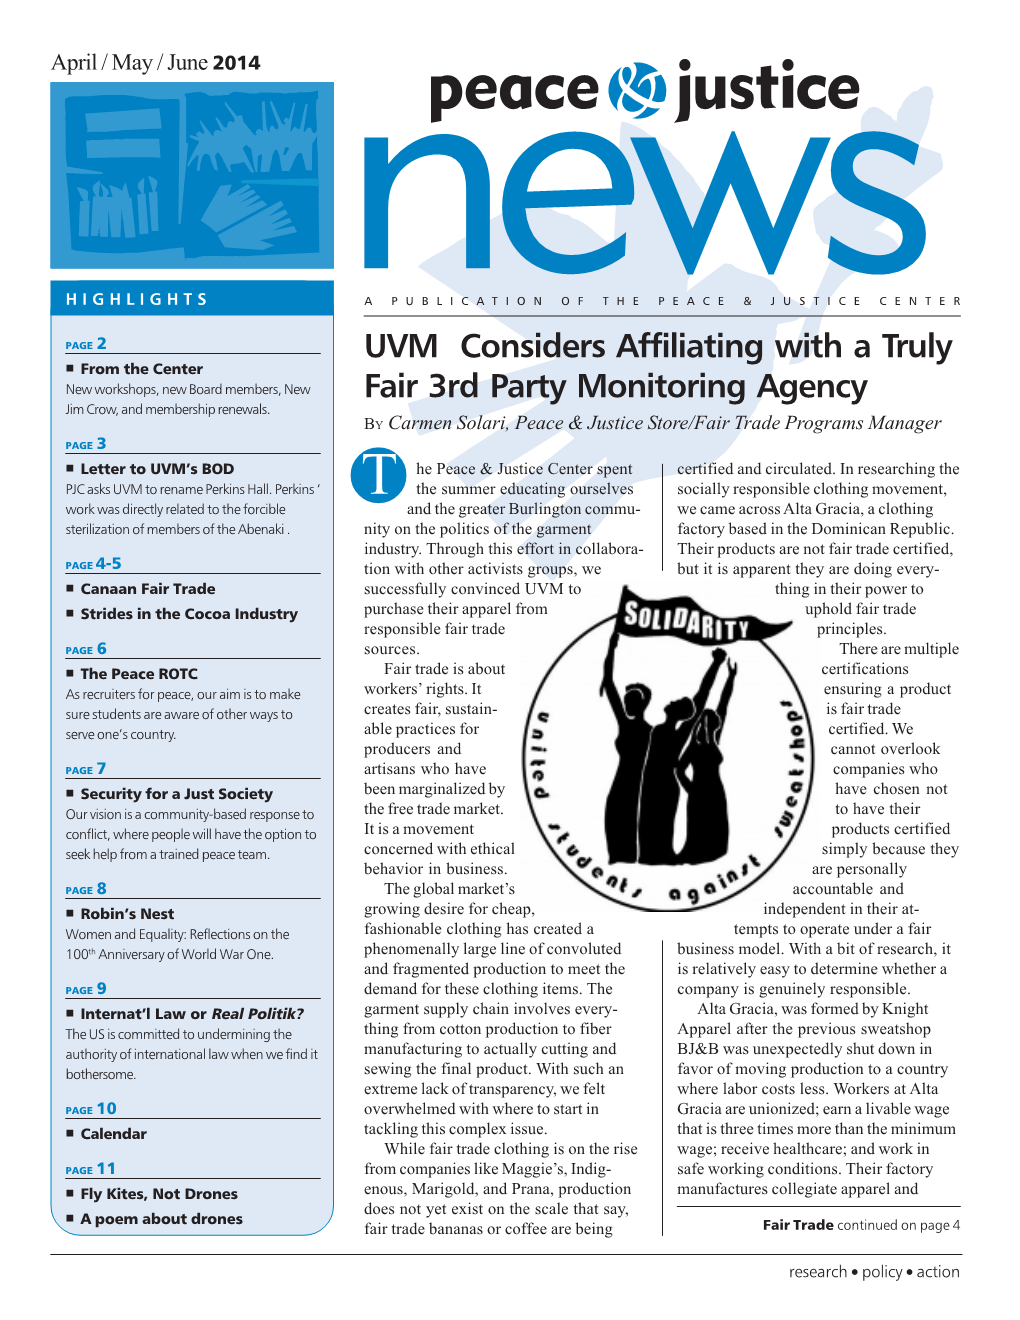 UVM Considers Affiliating with a Truly Fair 3Rd Party Monitoring Agency